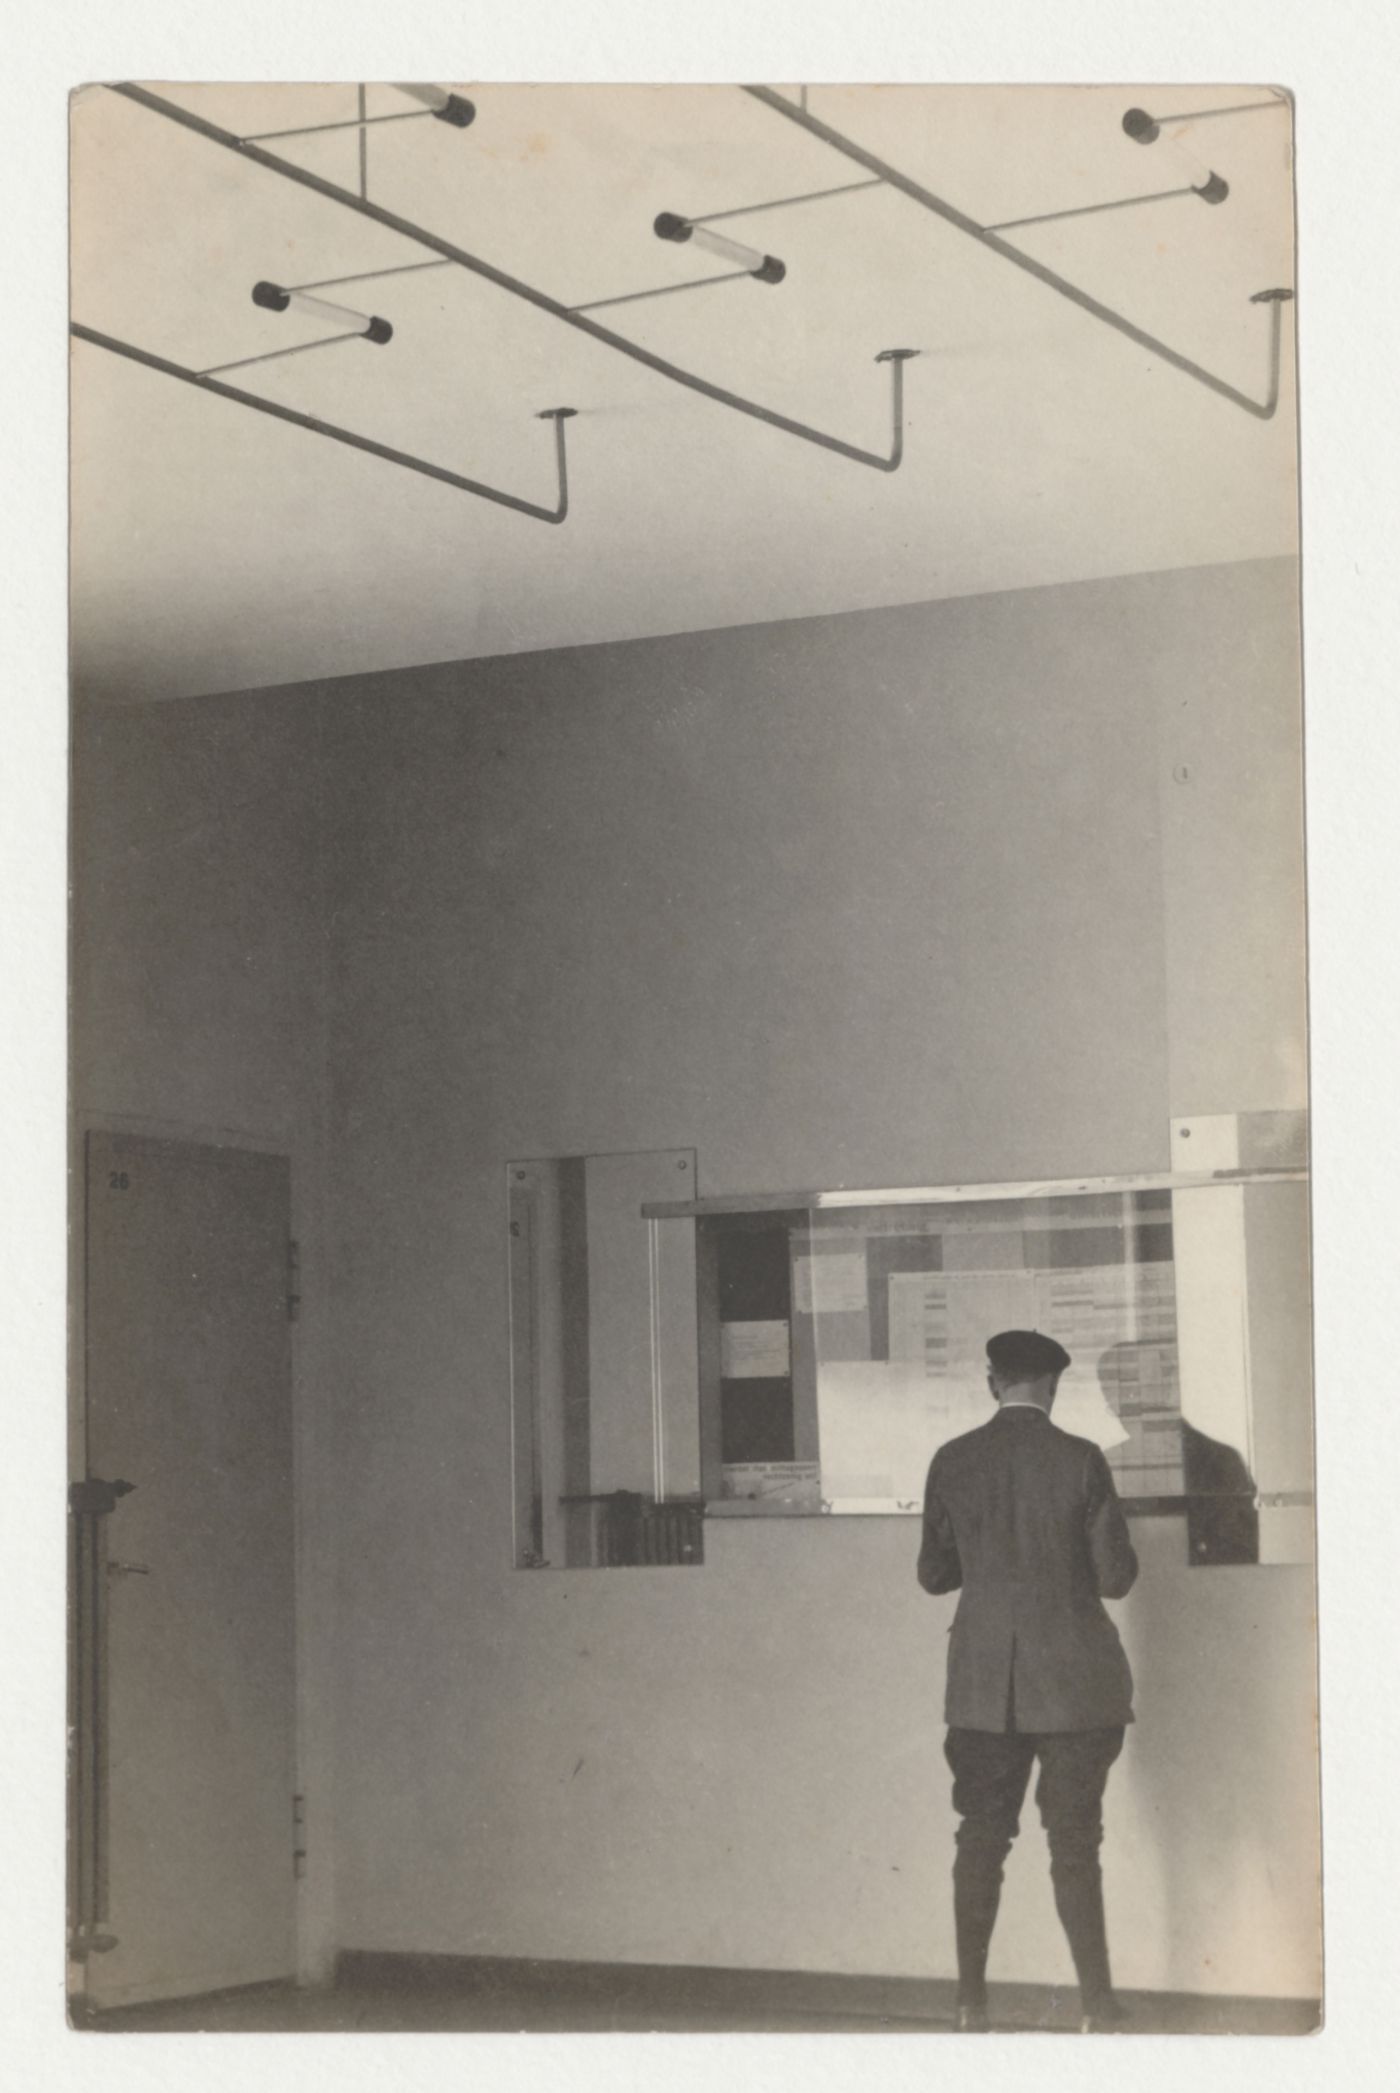 Interior view of Van Nelle Factory showing a man consulting a bulletin board, Rotterdam, Netherlands